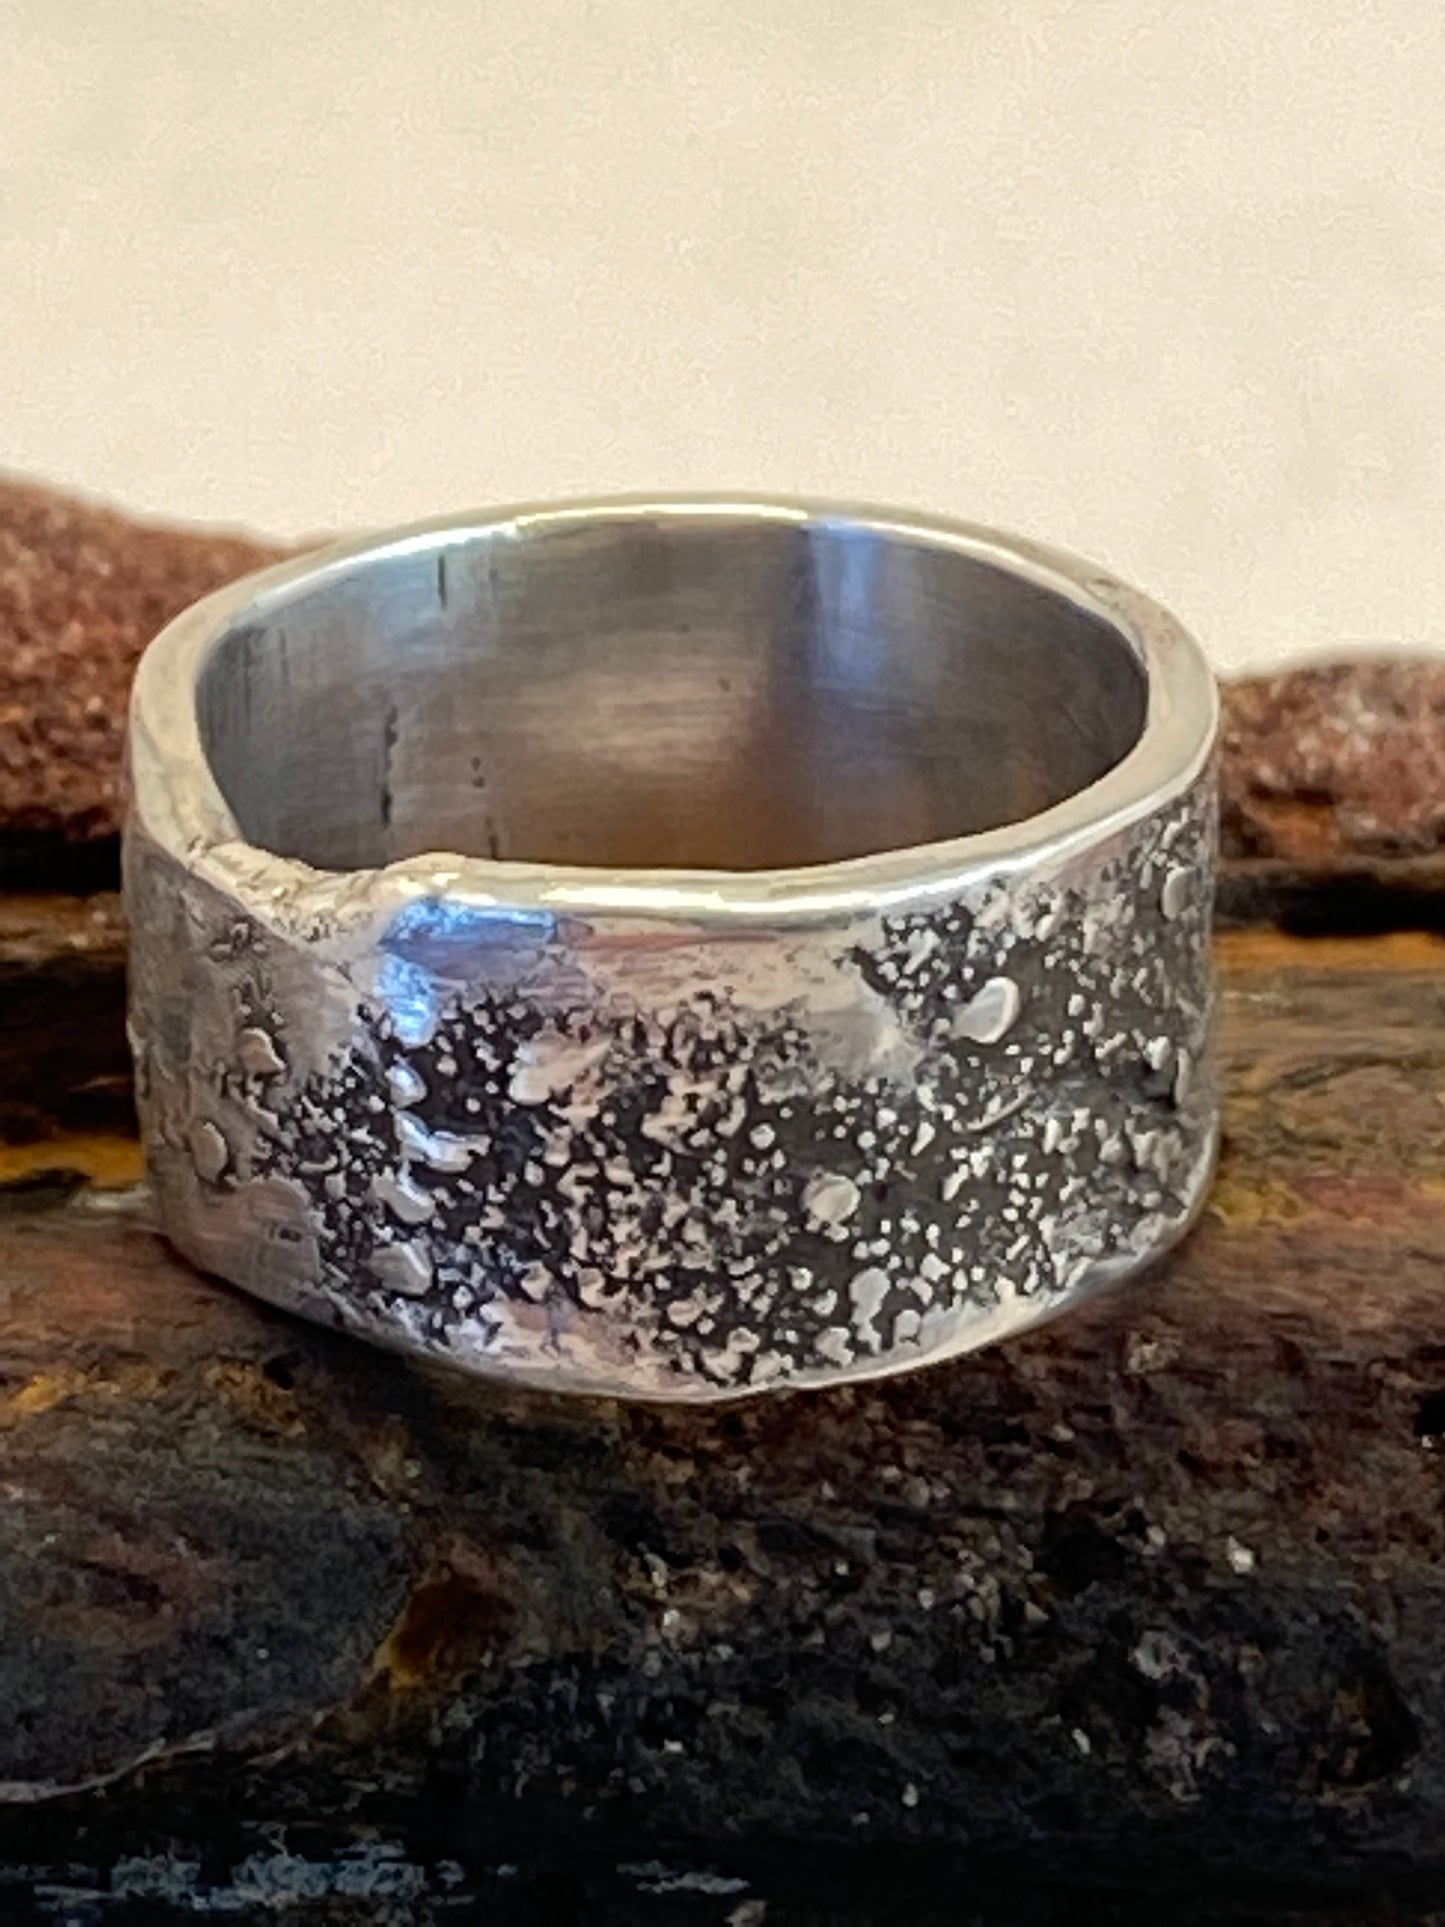 One-of-a-kind hand-crafted sterling silver cigar band ring, beautifully textured with fused silver dust ad with gorgeous organic patina. Ring size 6. Style: rustic, boho, funky, organic, earthy yet elegant.